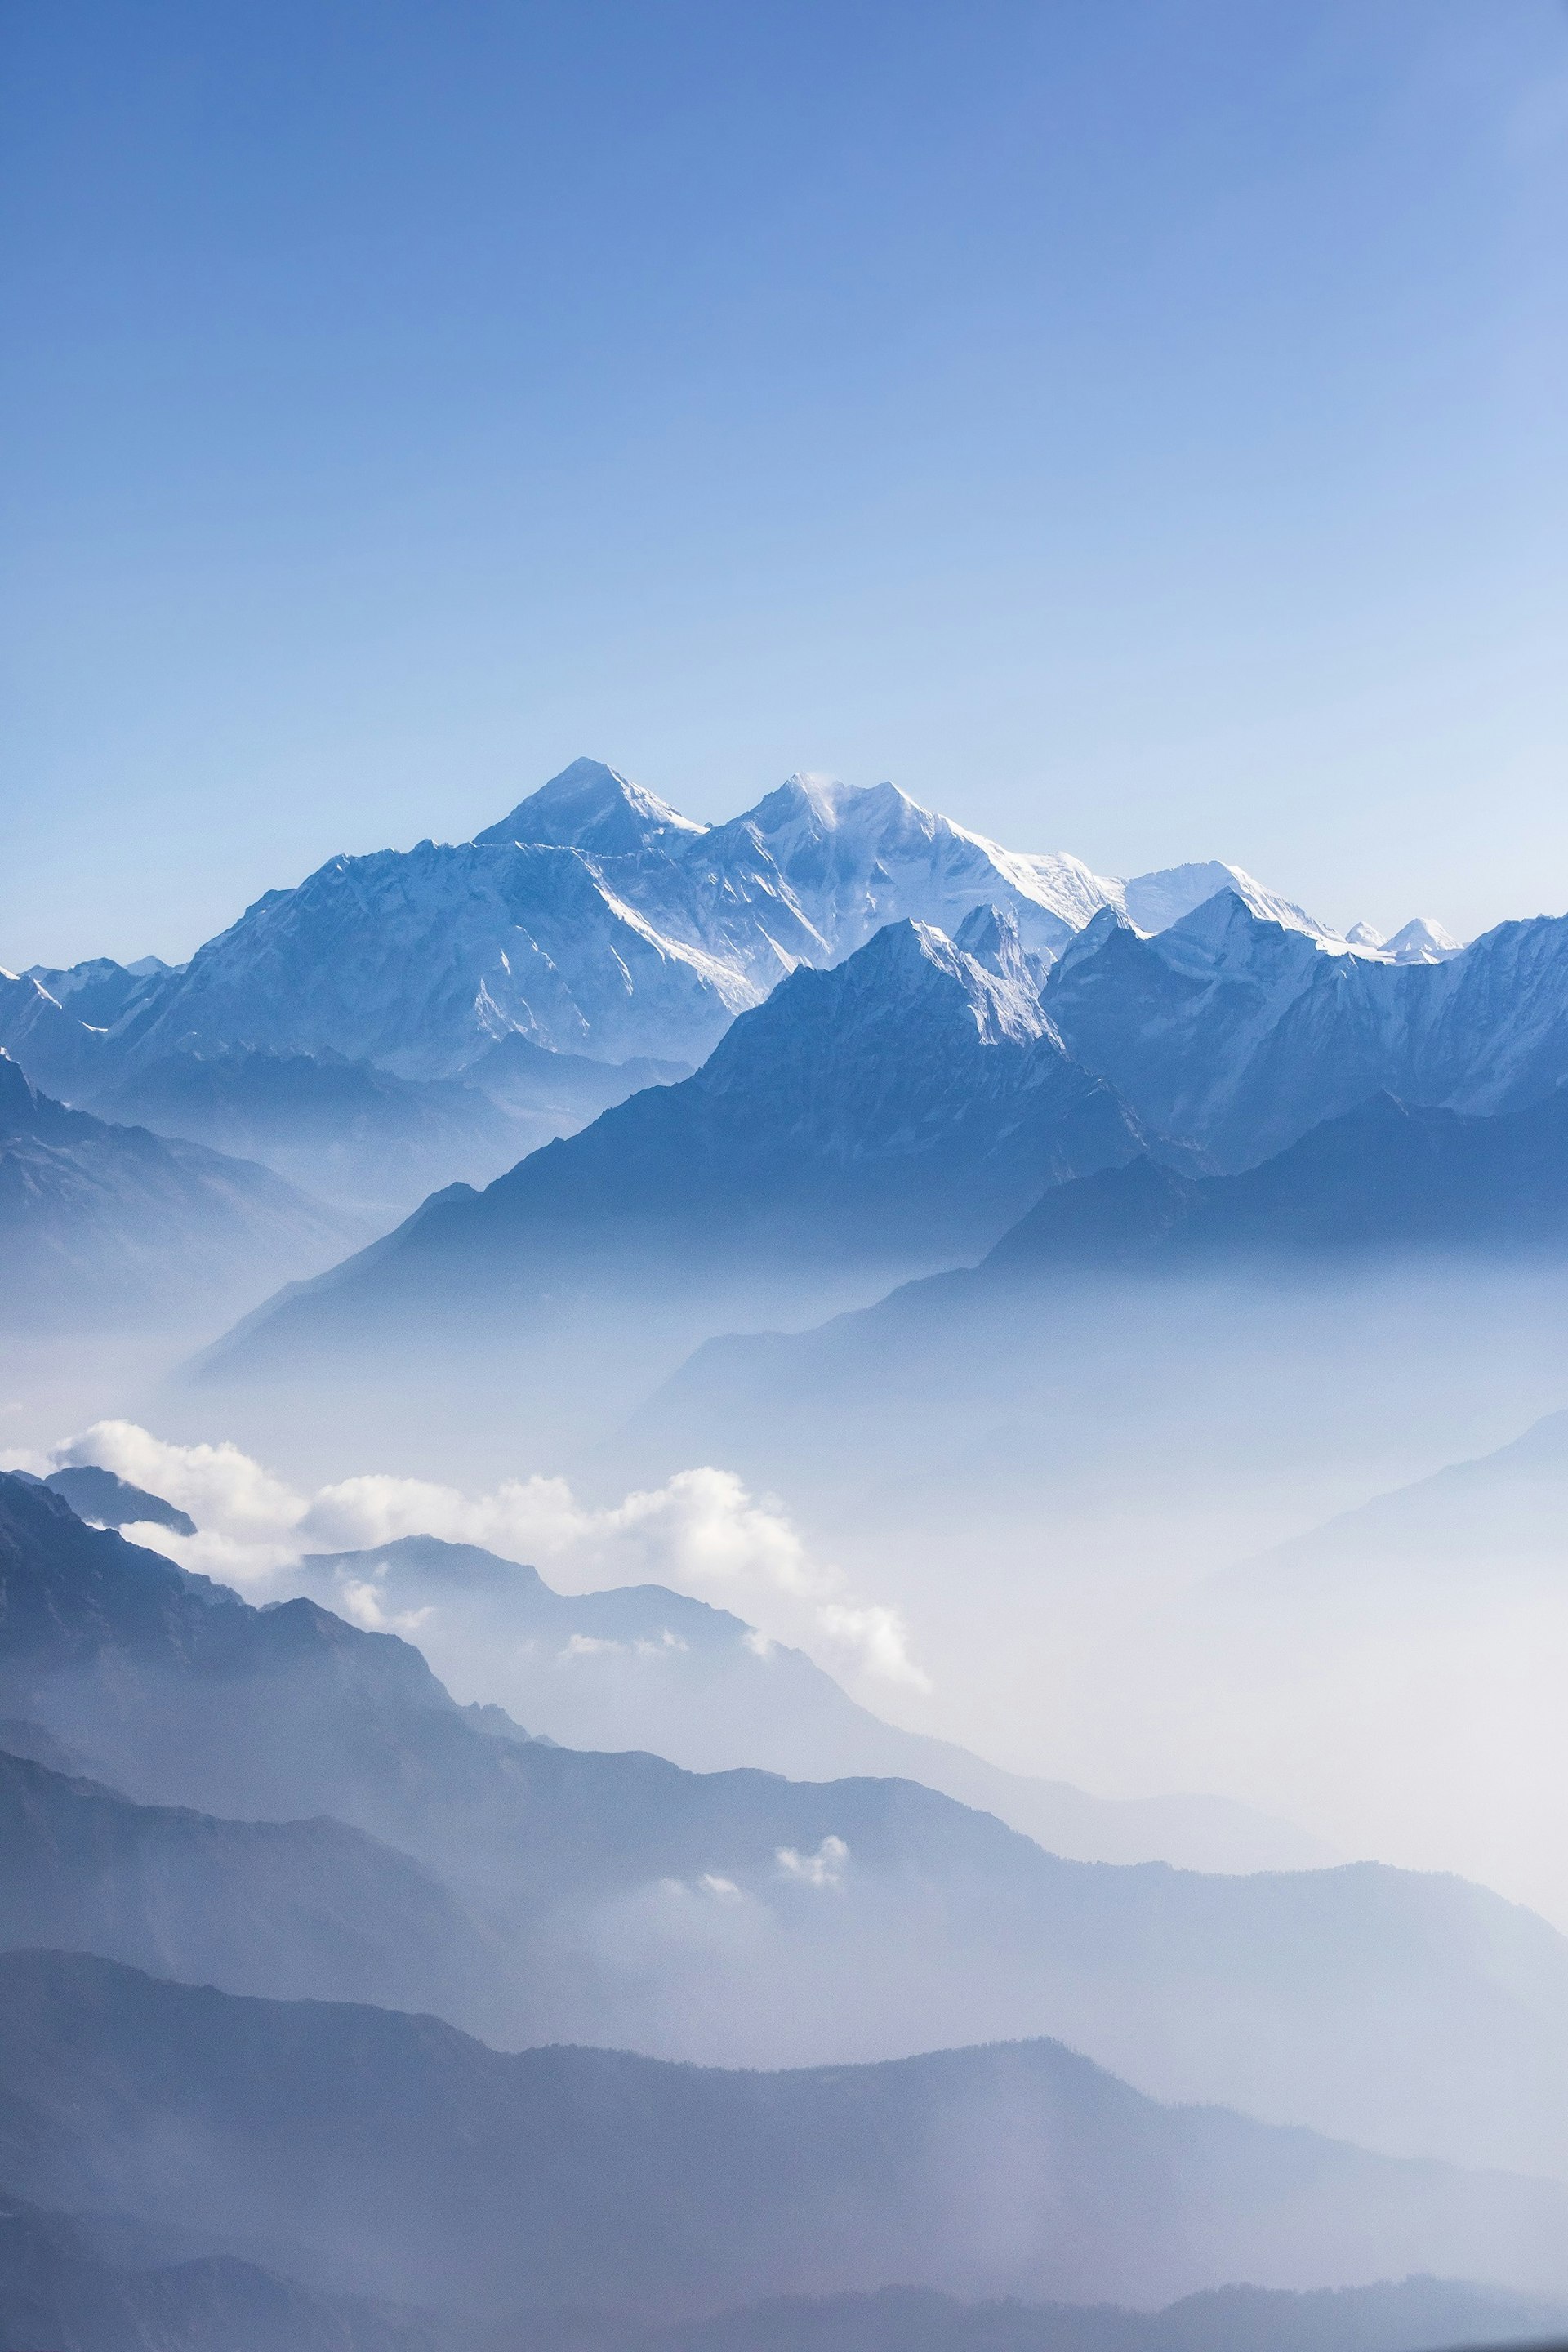 A stunning mountain range with clouds smothering some peaks: Mount Everest and other Himalayan peaks on a sunny day.